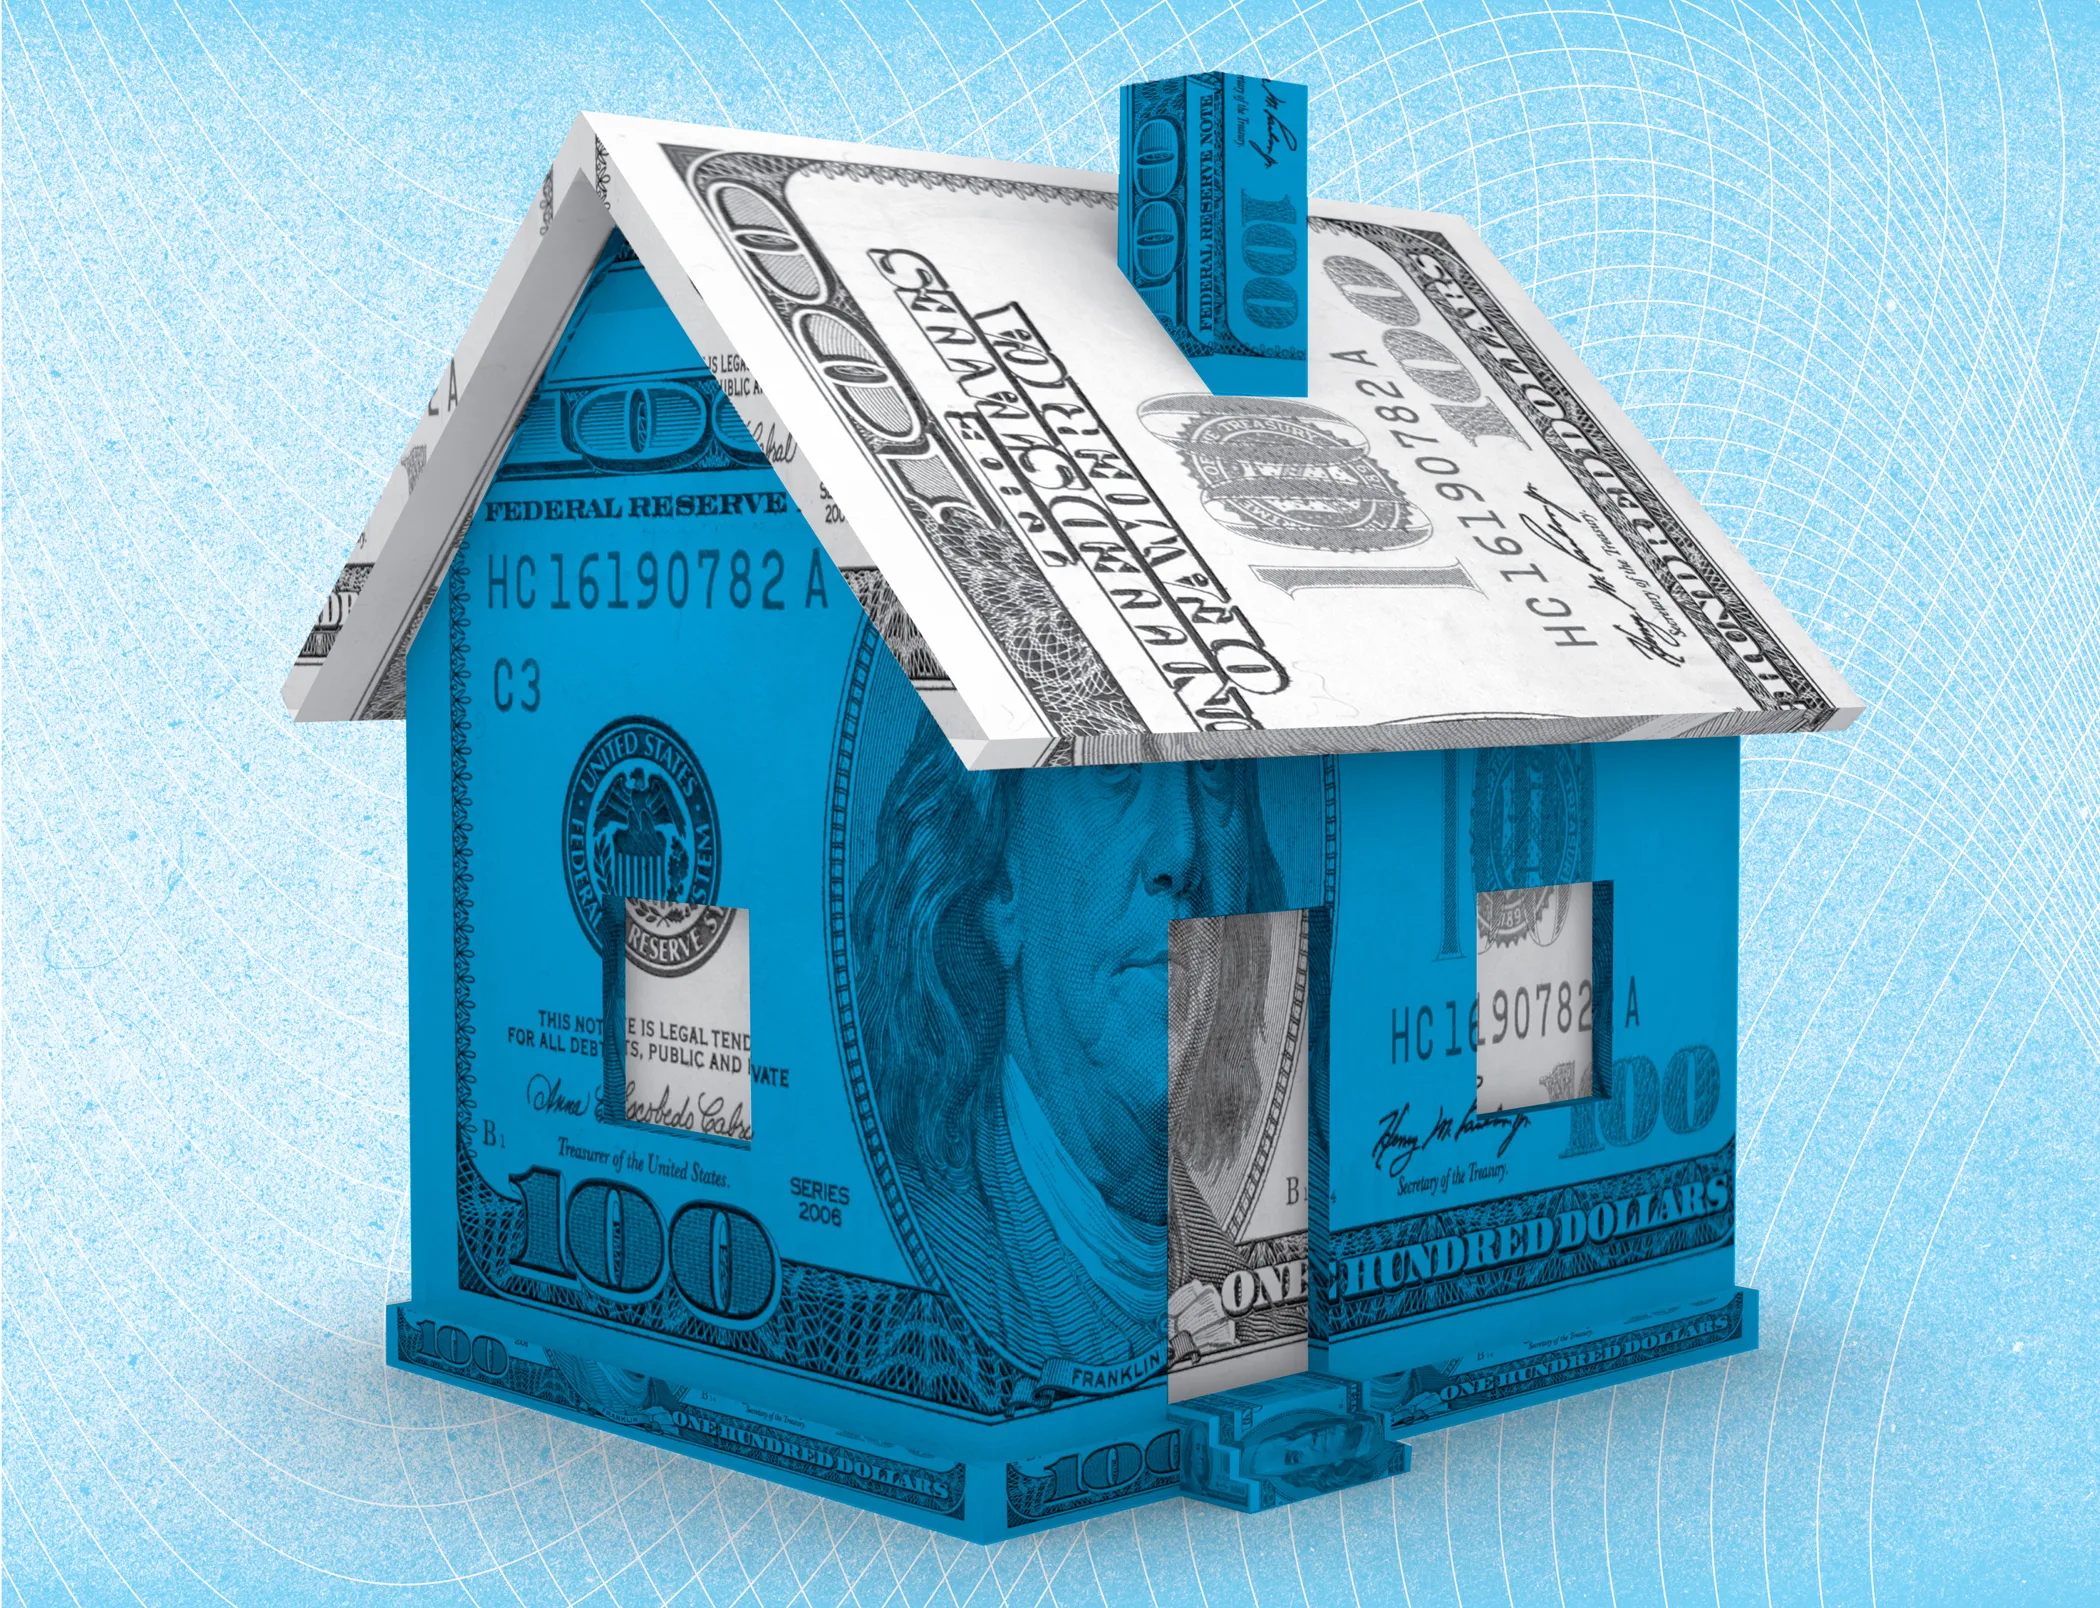 Should I Buy an Investment Property?